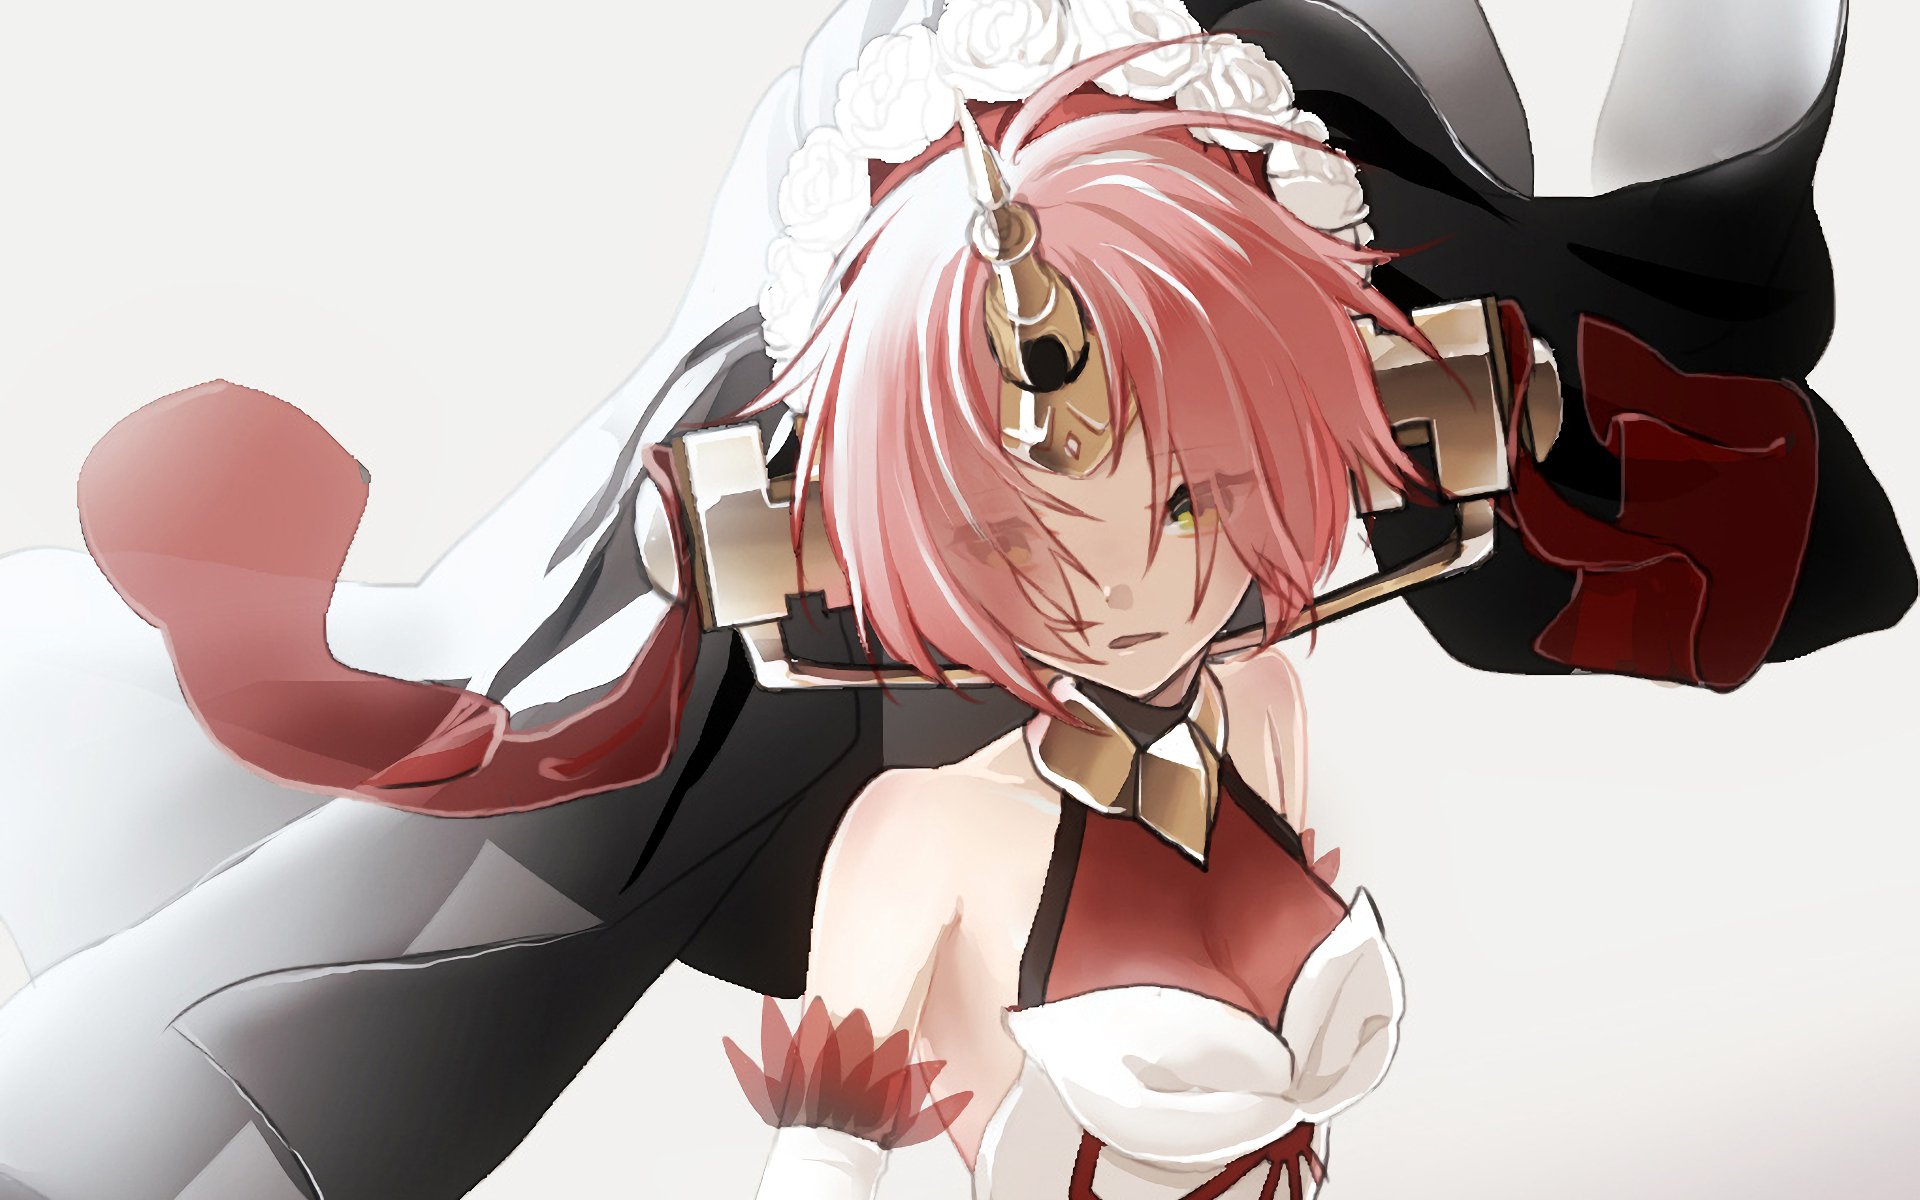 Fateapocrypha Hd Wallpaper Background Image 1920x1200 9750